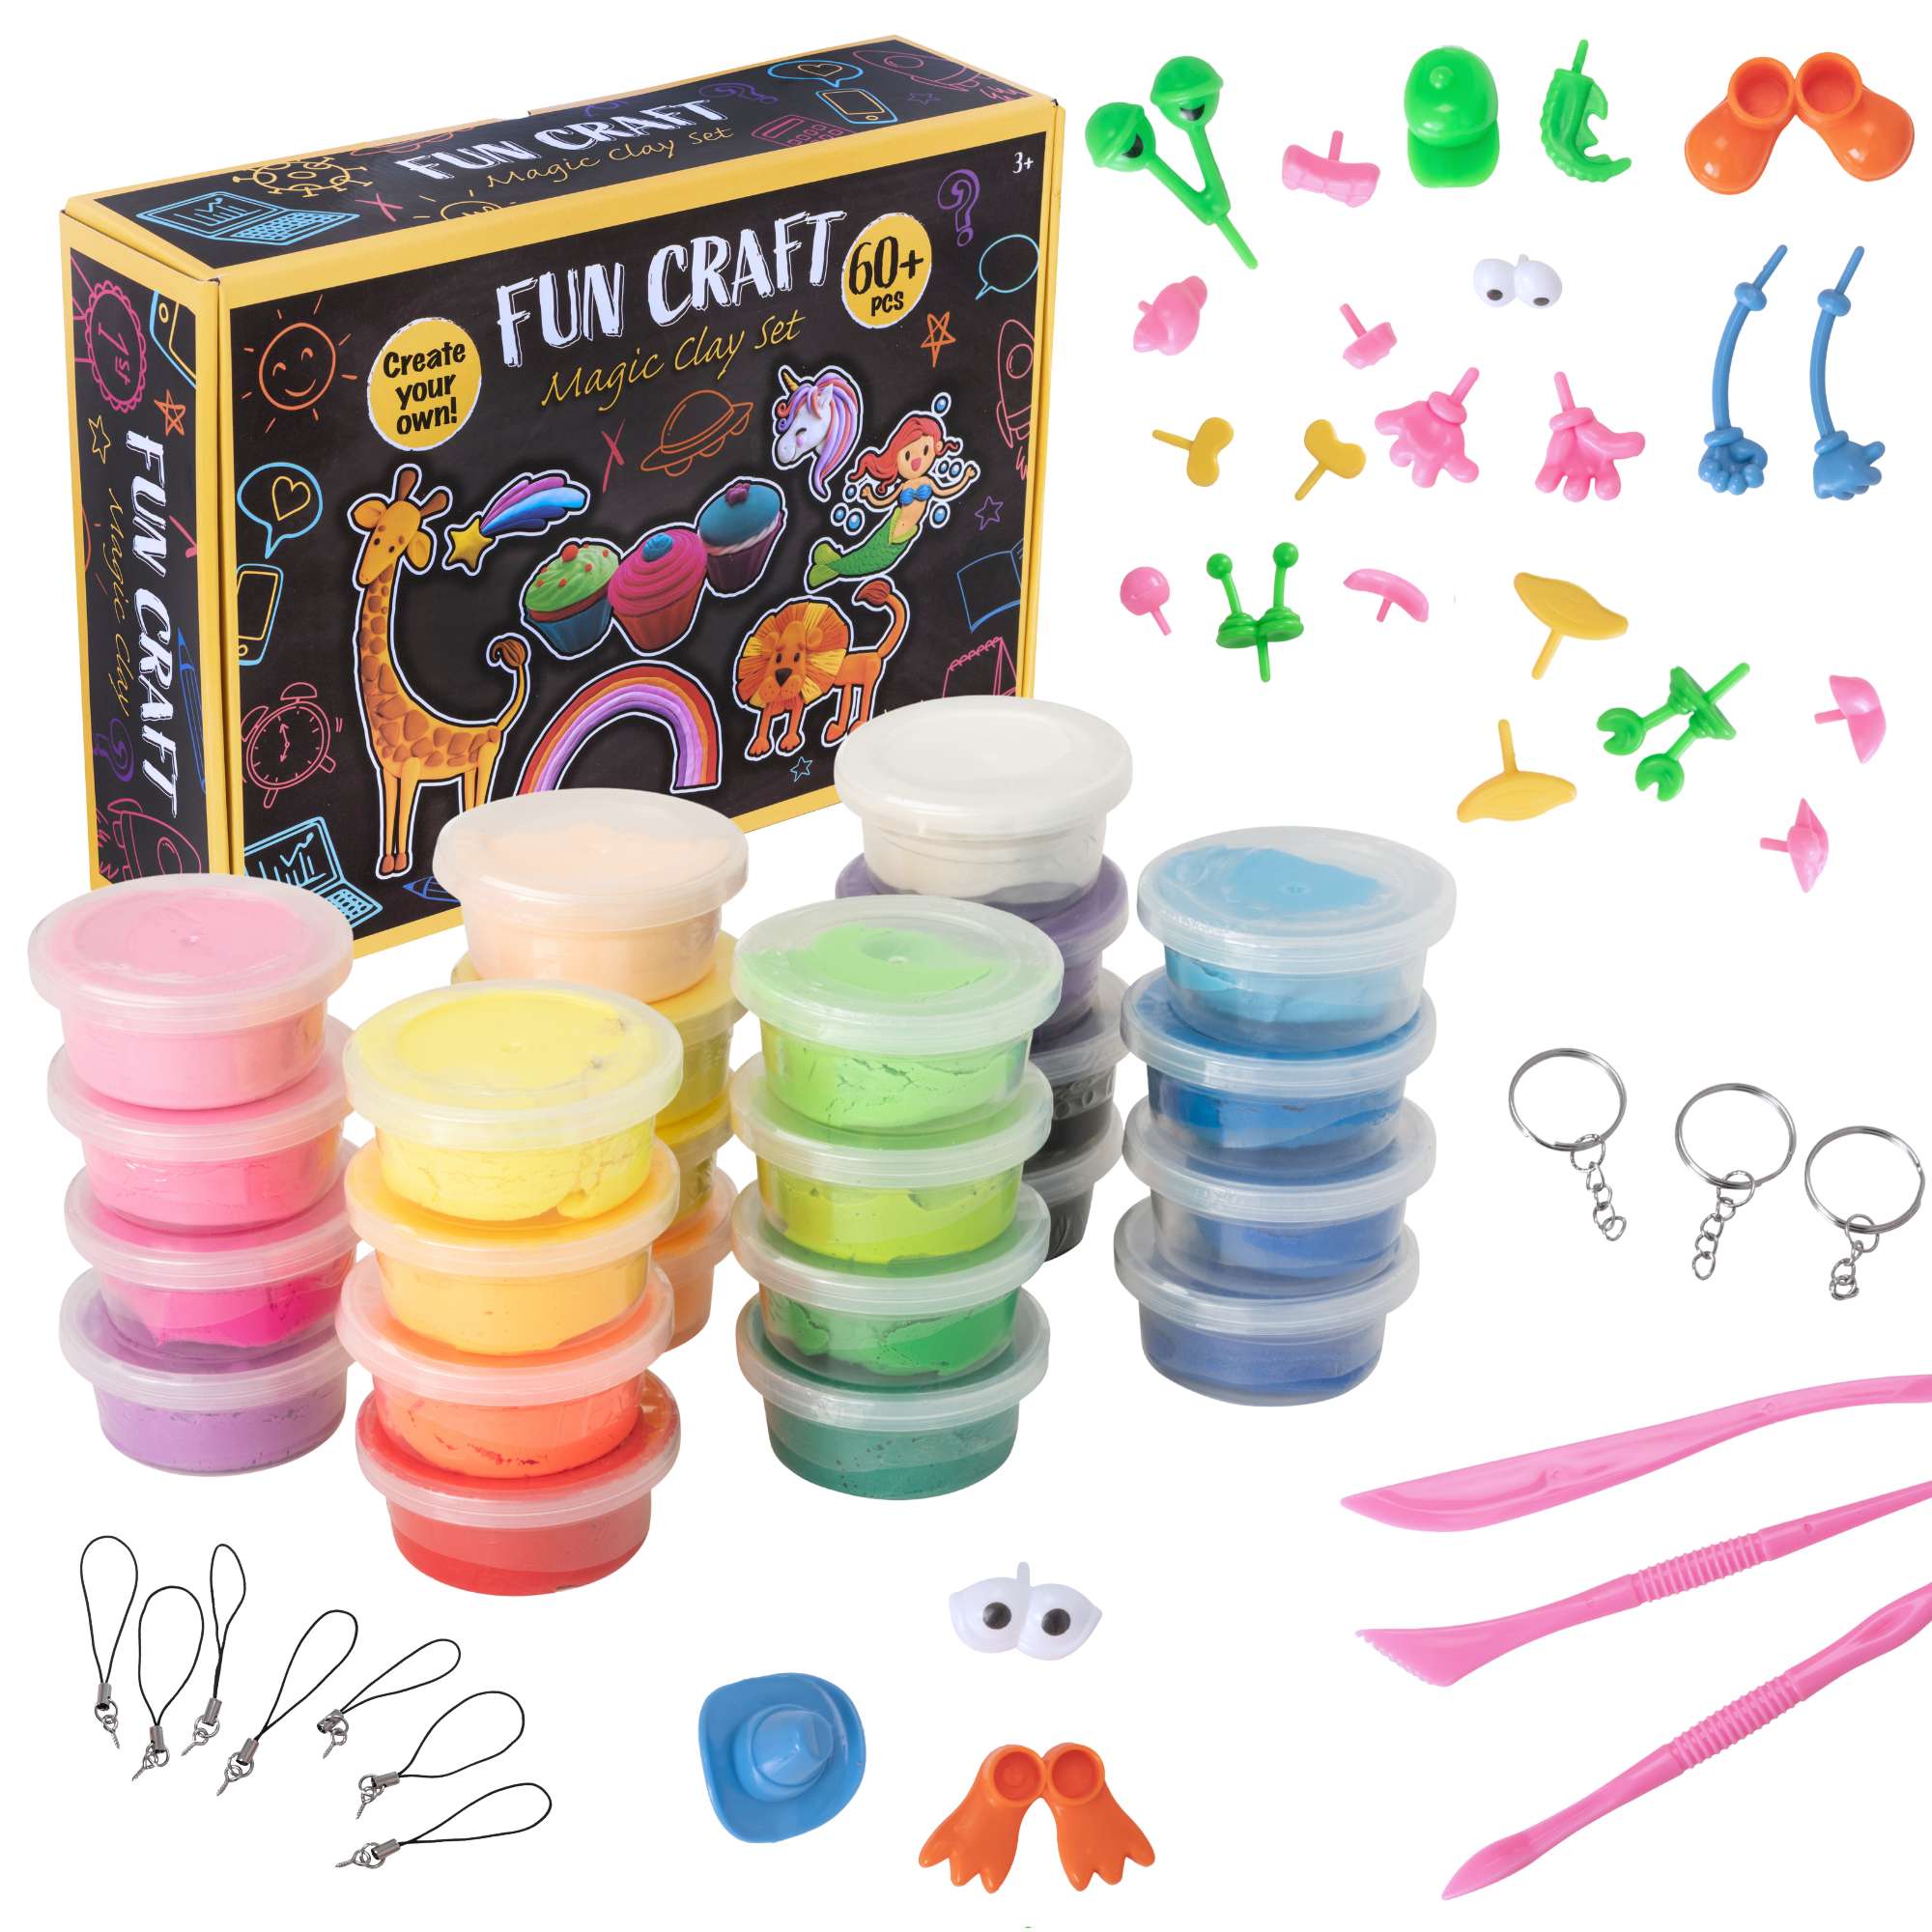 Image of Fun Craft Magic Modelling Clay Kit - 60+ Pieces